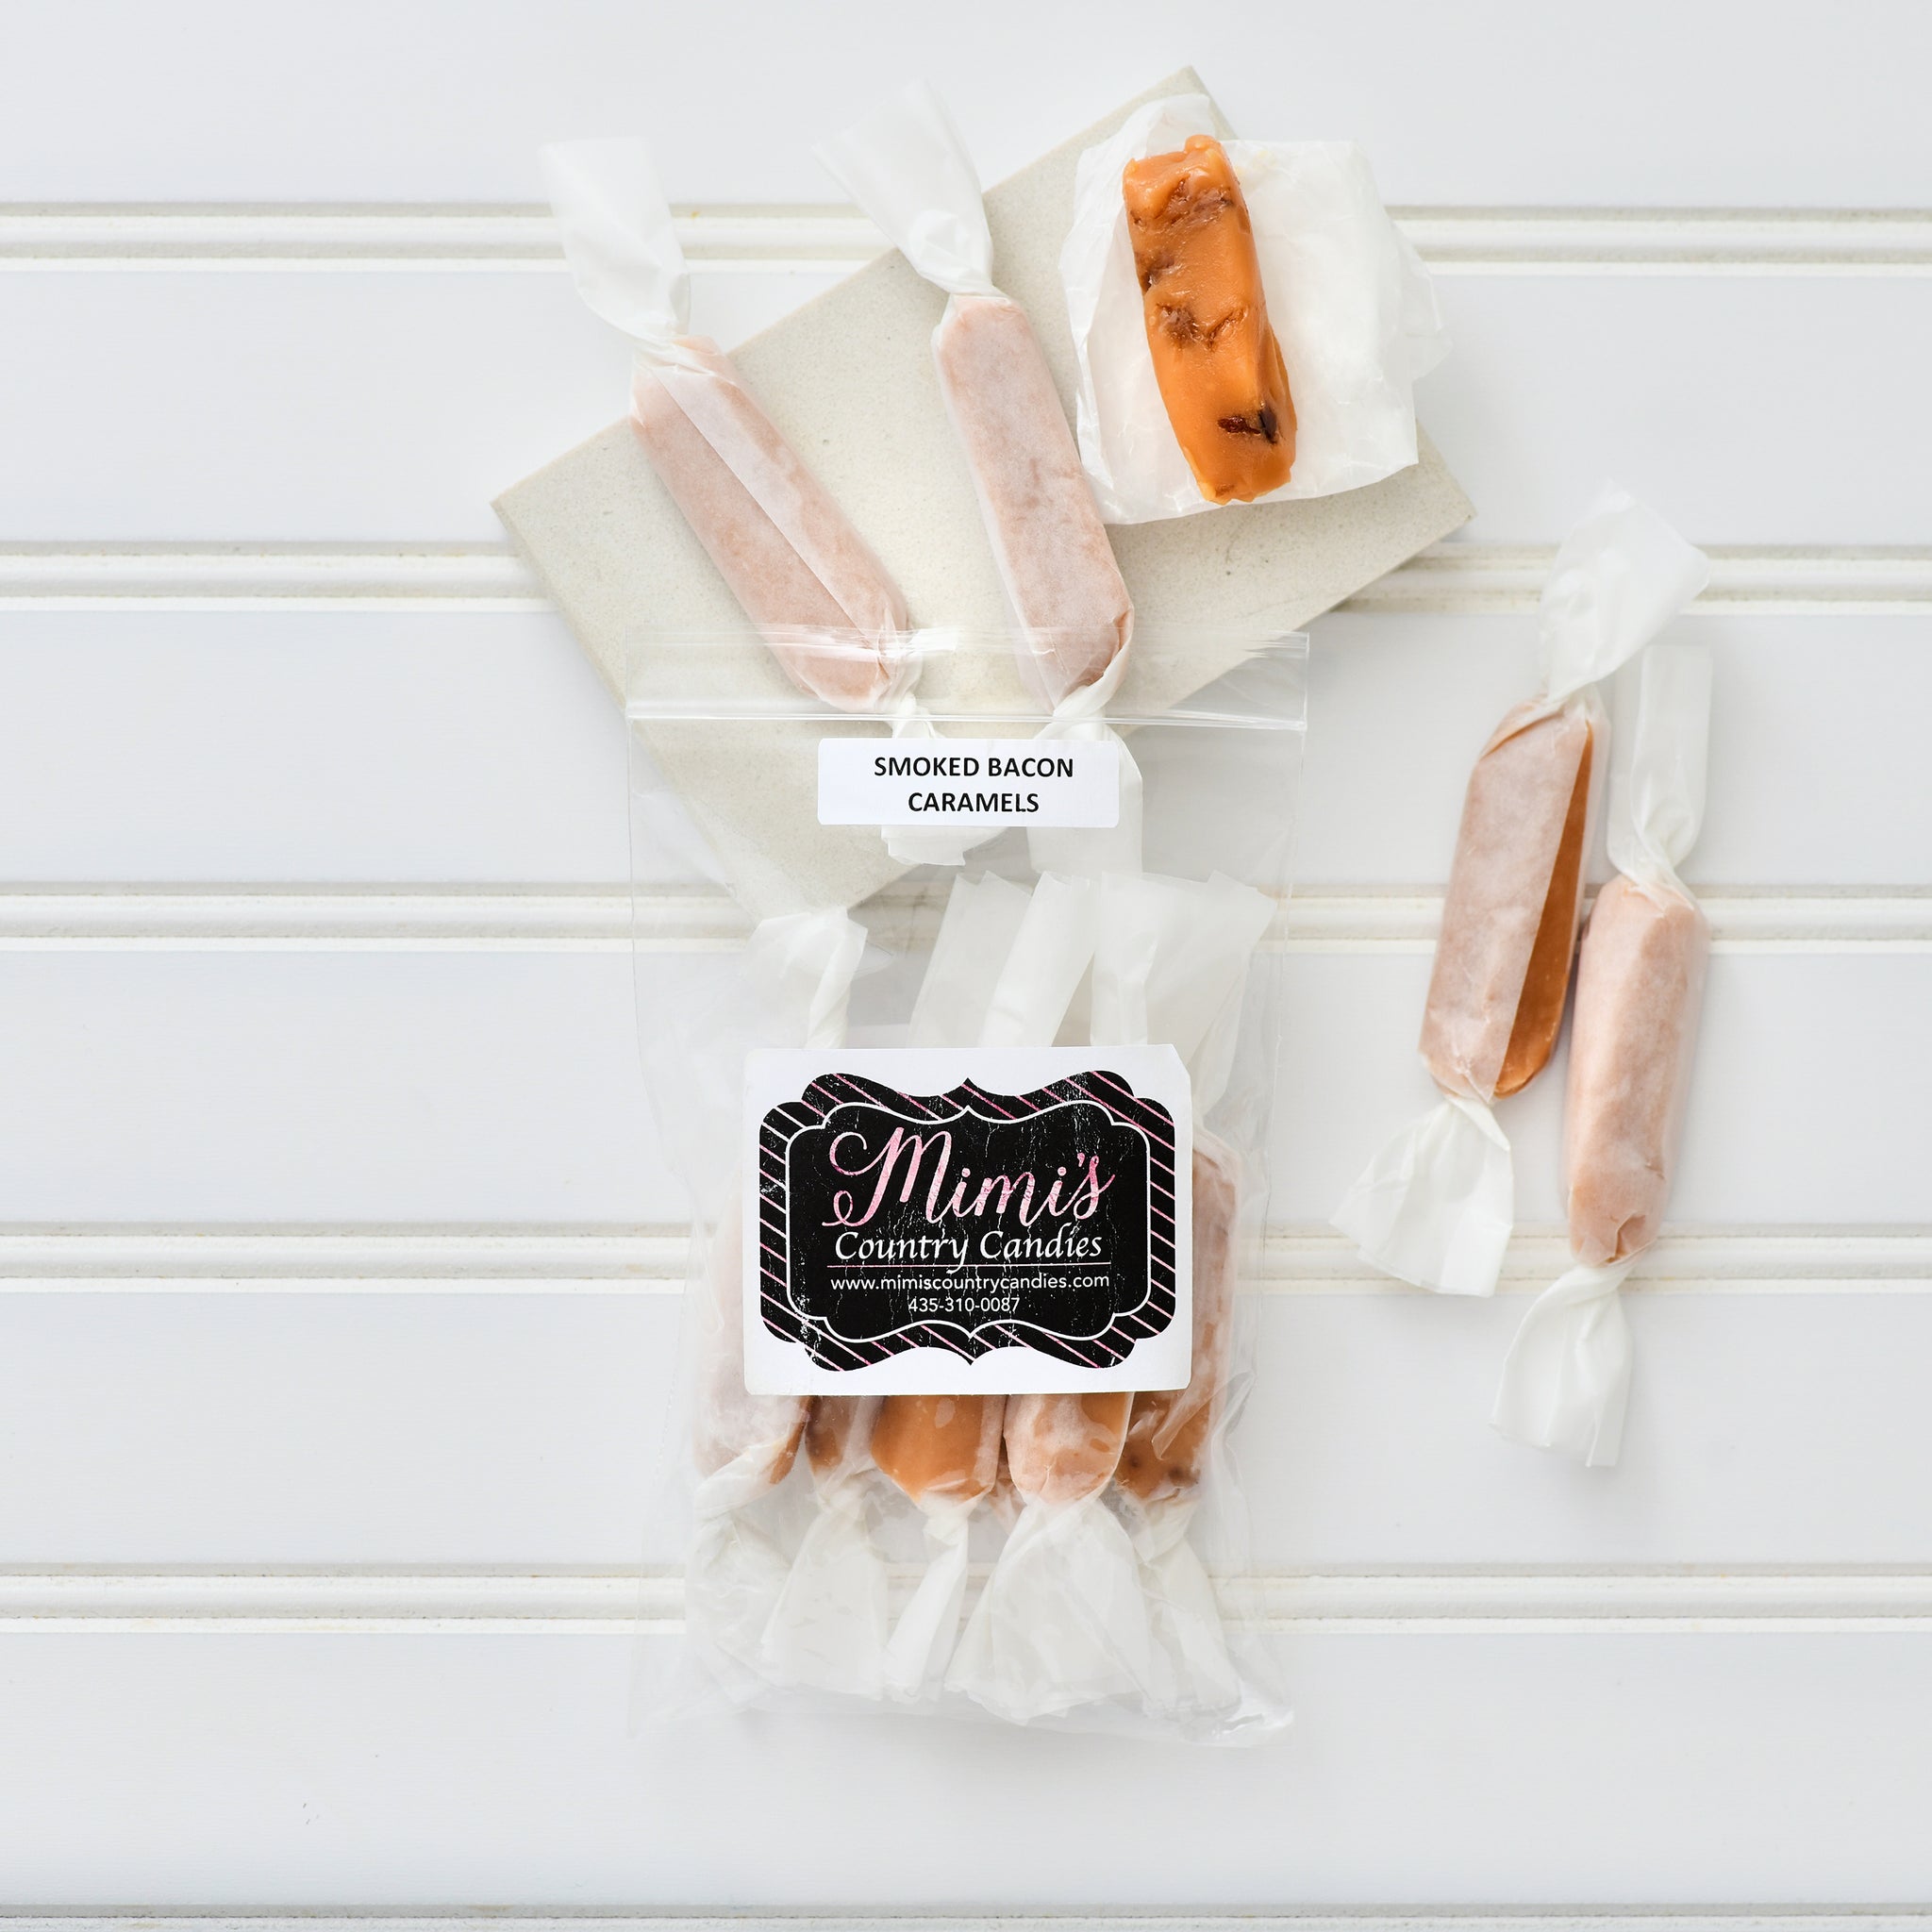 Mimi's Country Candies Smoked Bacon Caramels